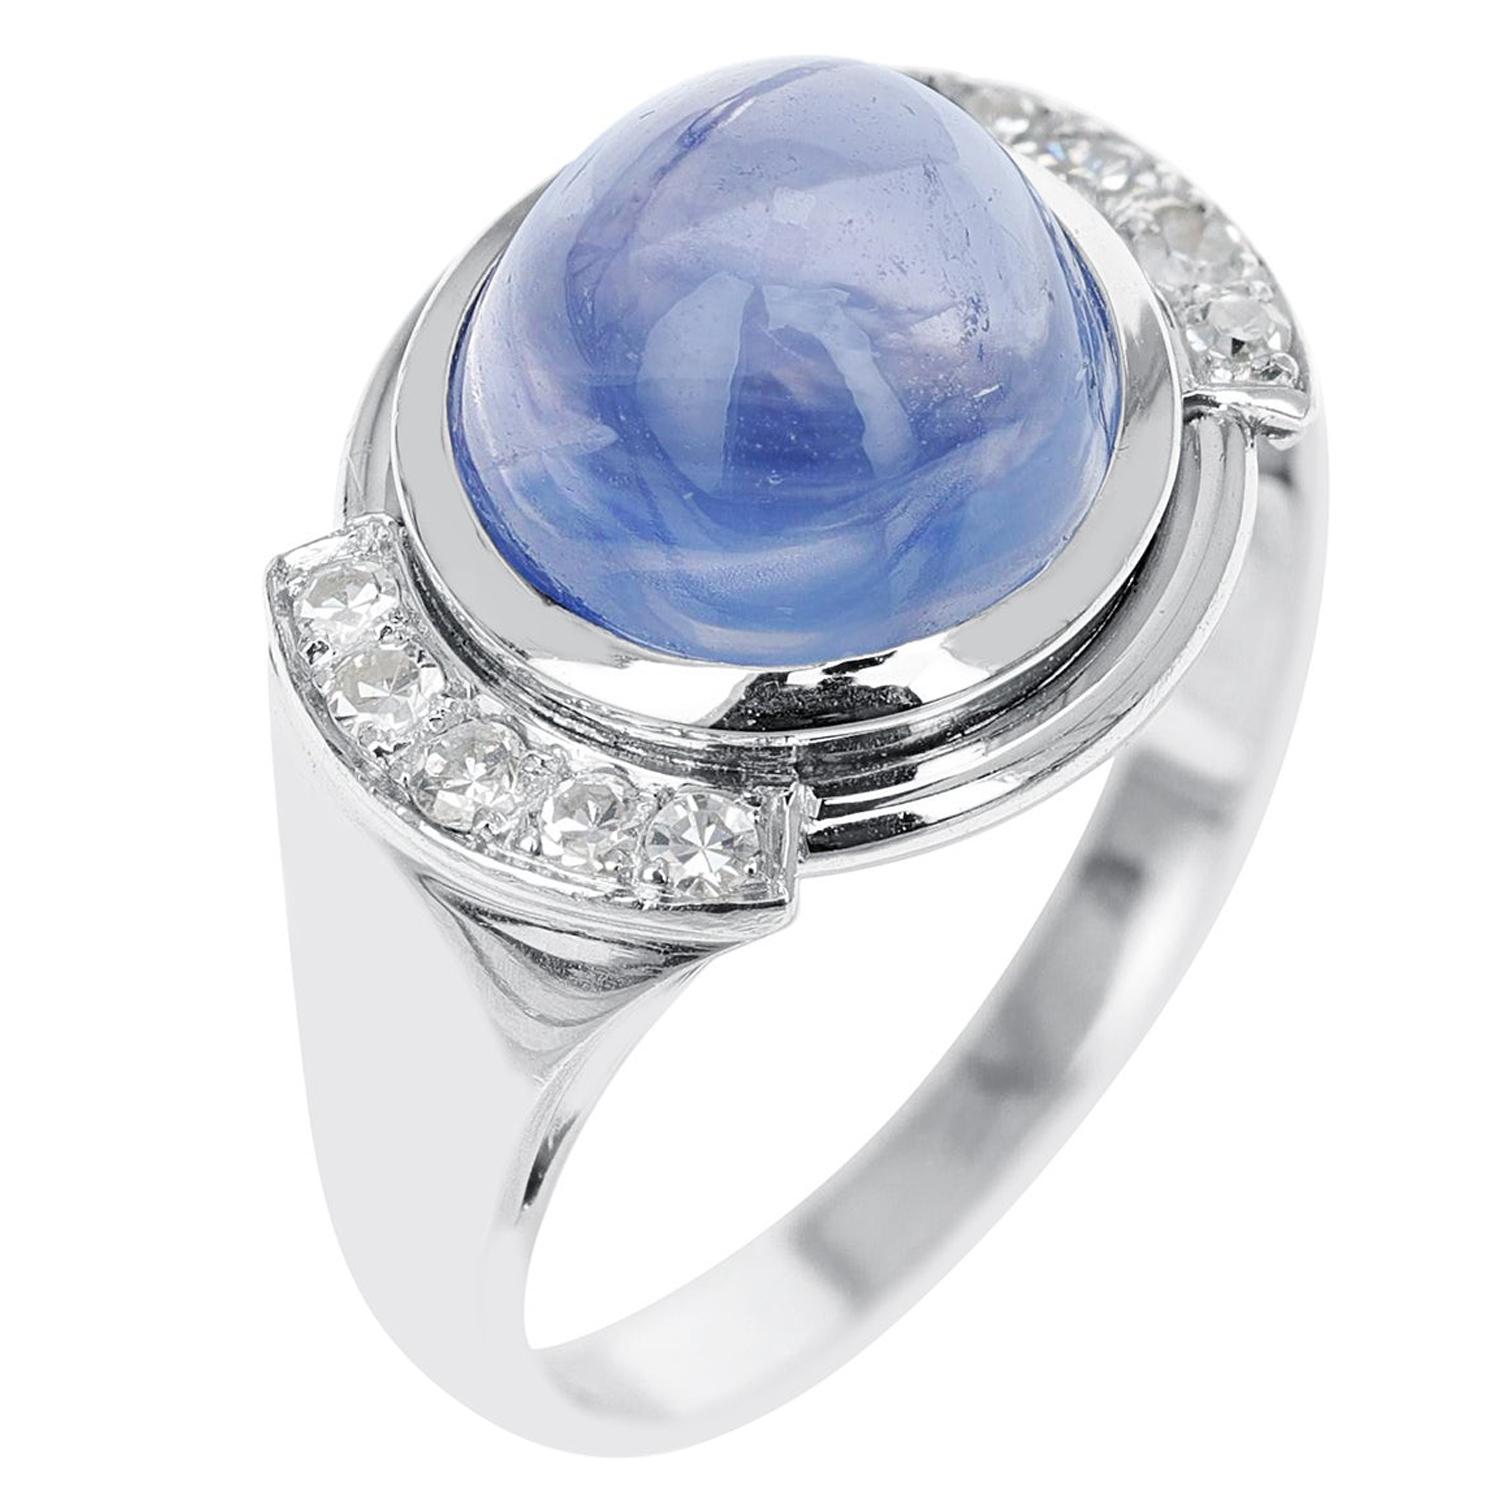 12 Ct Unheated Ceylon Sapphire Cabochon Ring with Diamonds, Paperwork Incl.